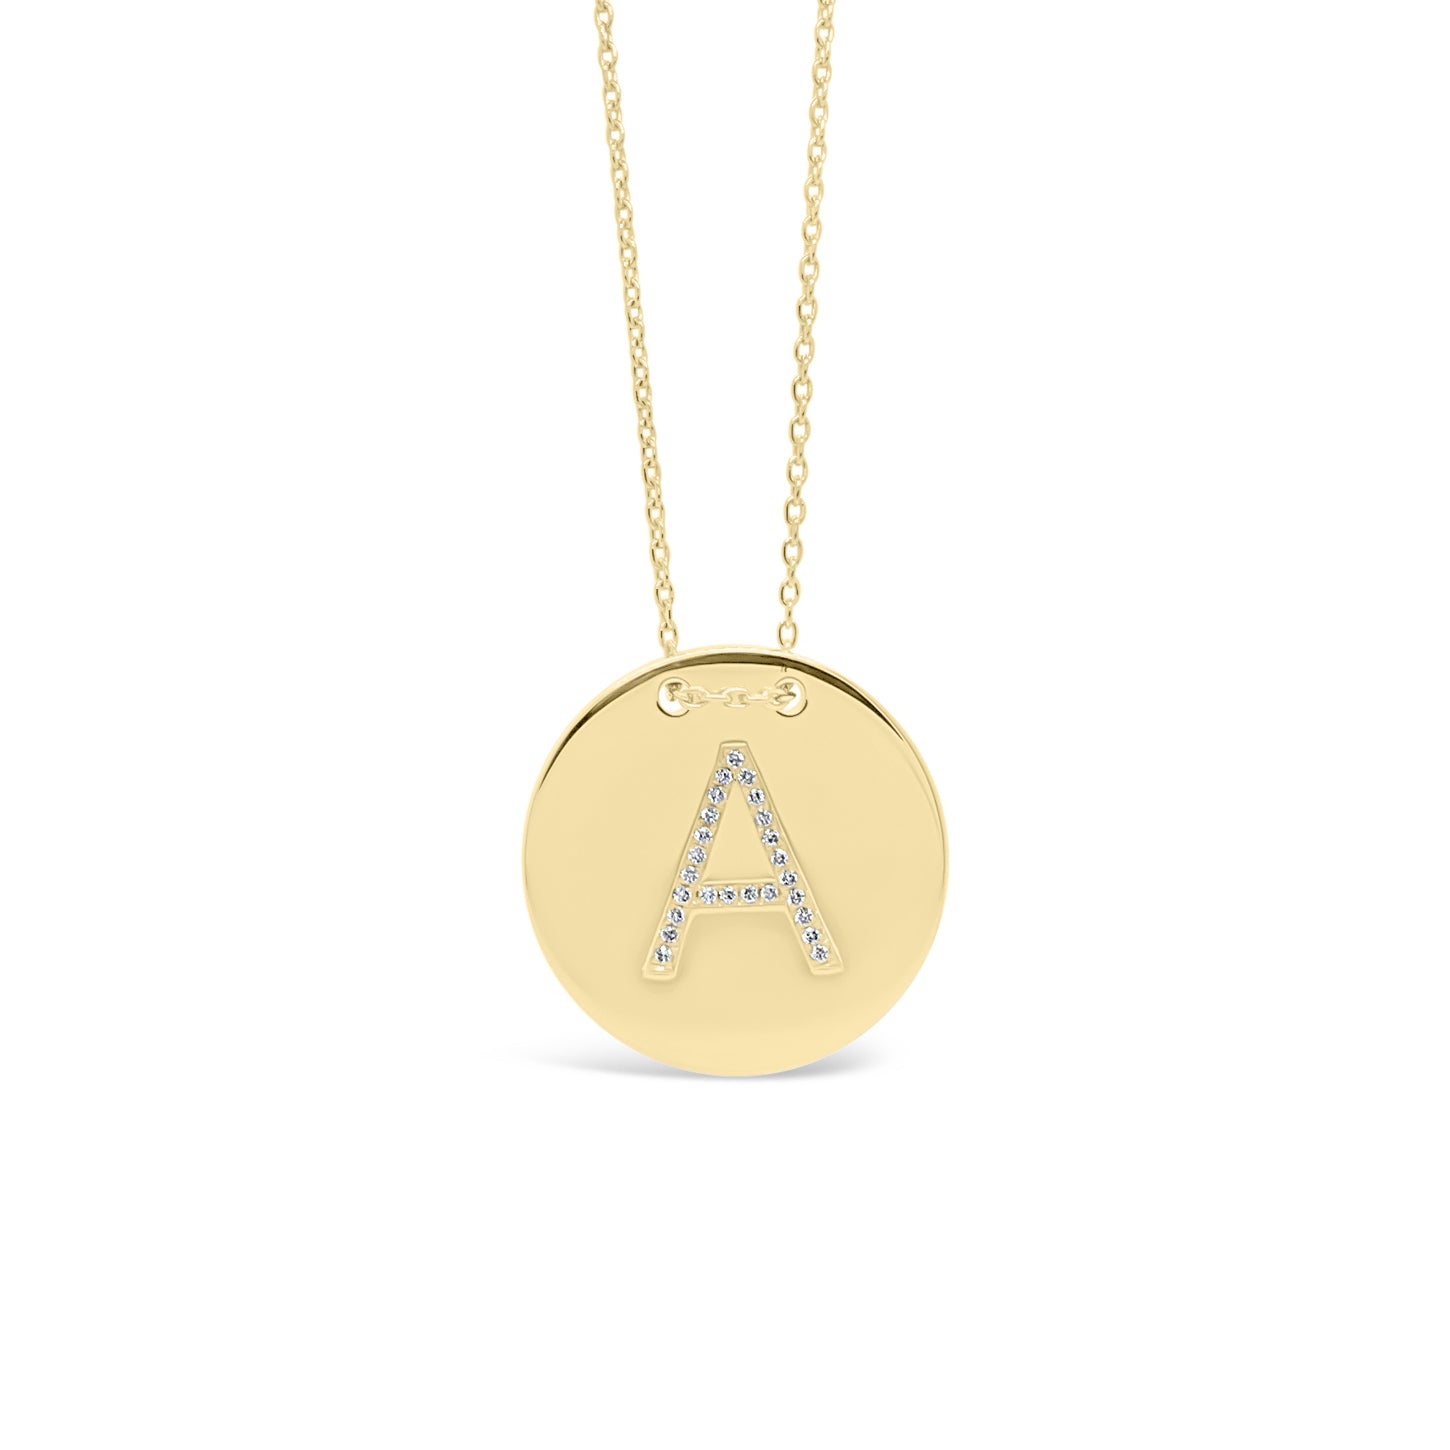 Gold & Diamond Initial Disc Pendant  -14K gold weighing 6.97 grams  -25 round diamonds totaling 0.07 carats  16-18” adjustable chain